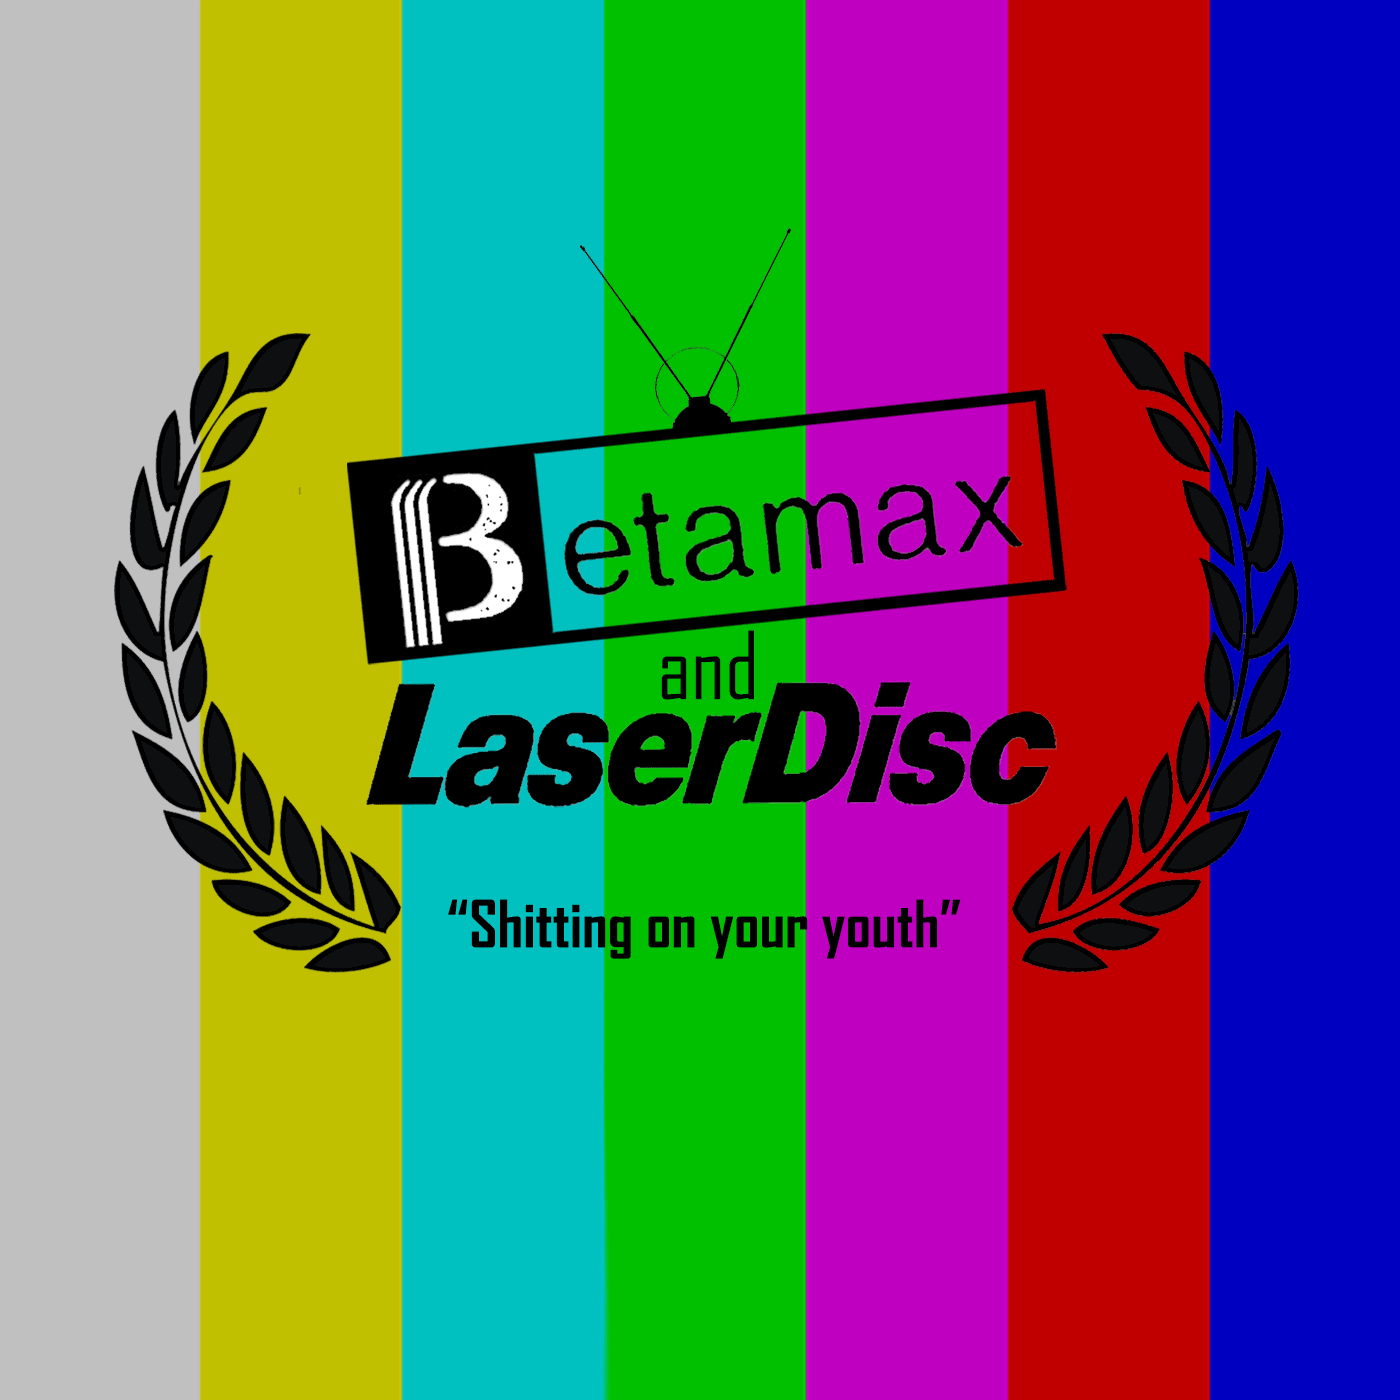 Betamax & Laserdisc #5 | The Television & Film Podcast from The Unheard Nerd